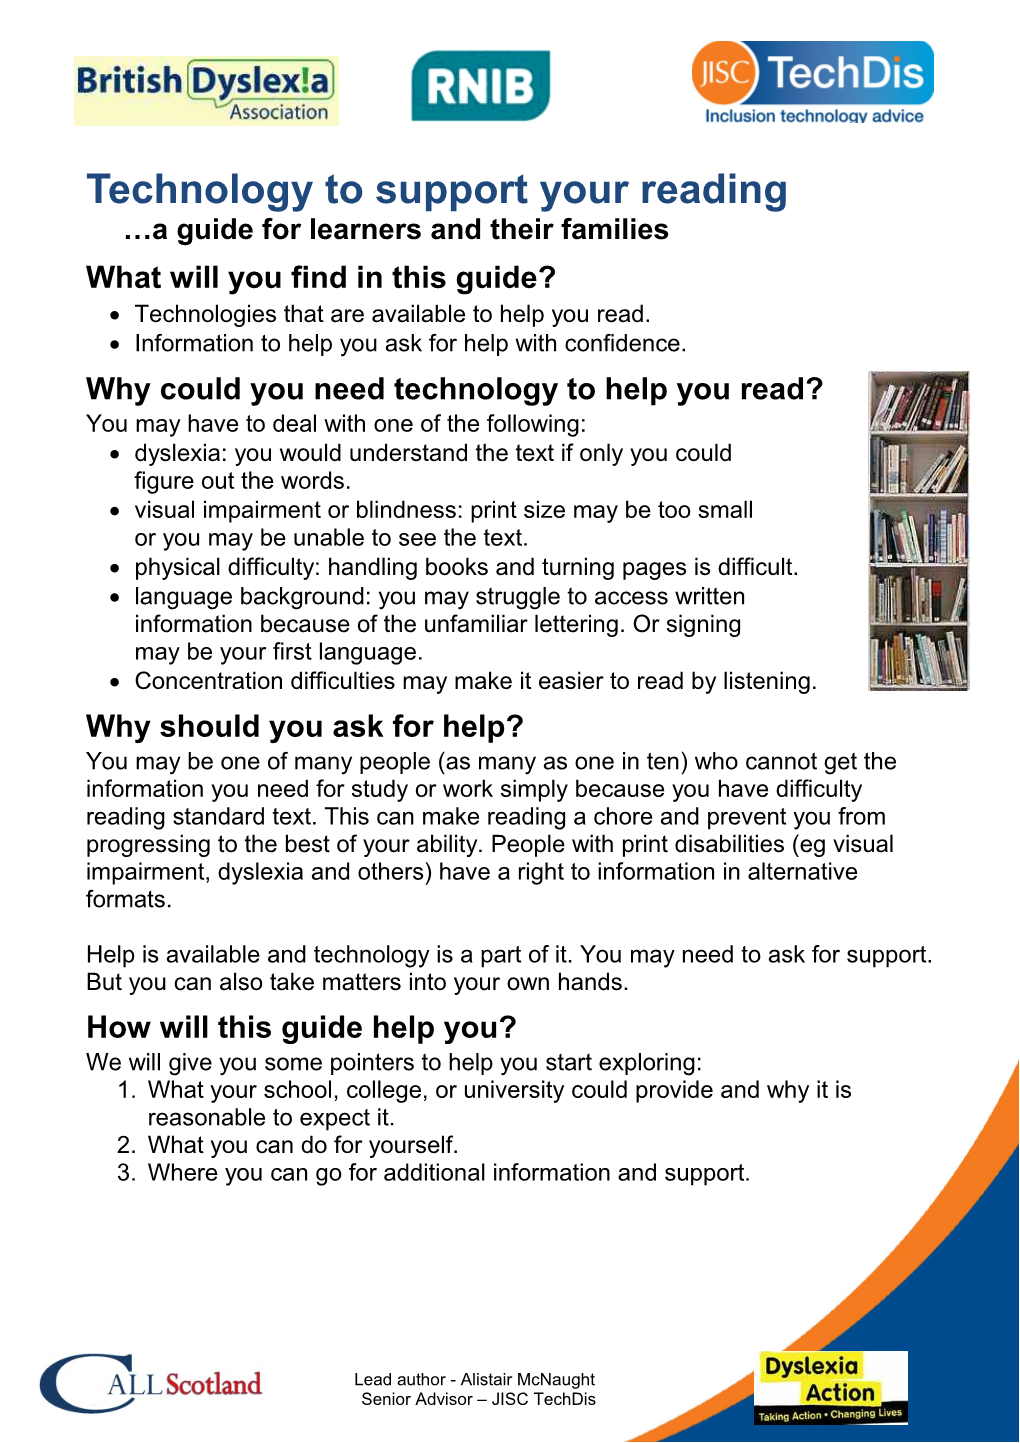 Technology to Support Your Reading